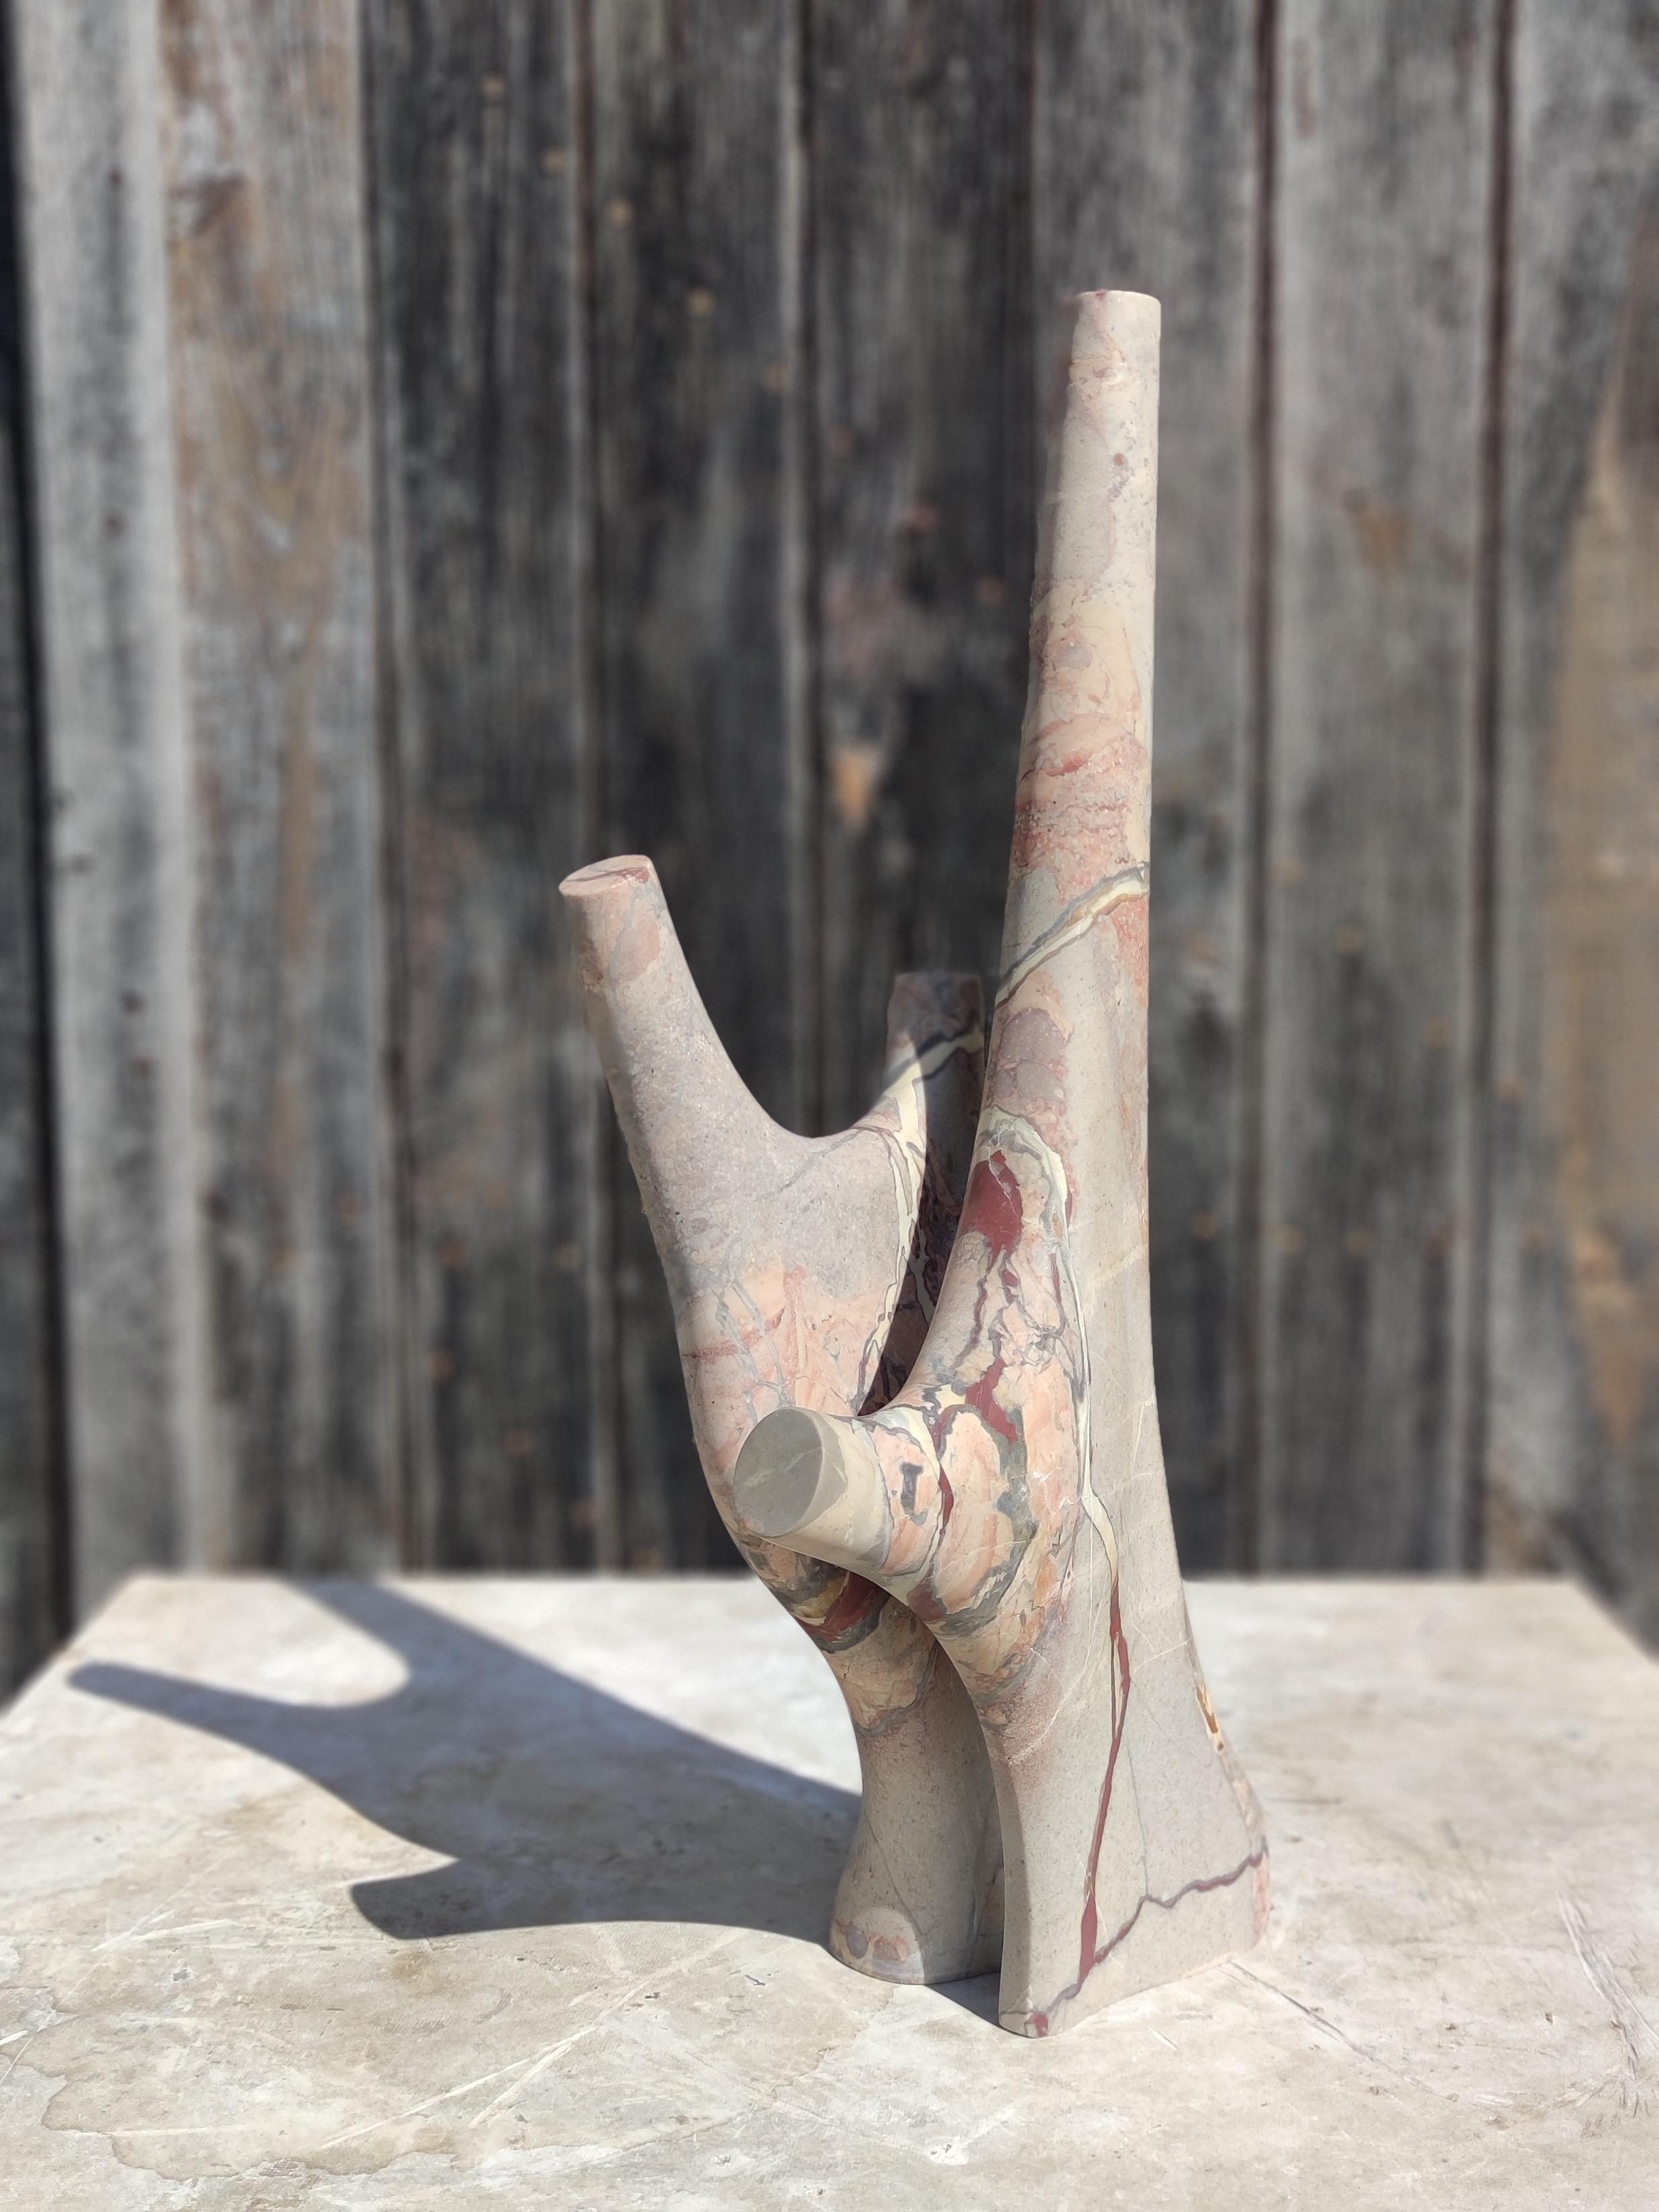 Tom Jablin is a sculptor who expresses organic shapes though marble as my main medium. Hisy work is driven by contemplation of nature, the oceanic universe, as well as human and animal bodies. From his work shop in the South West of France he shapes